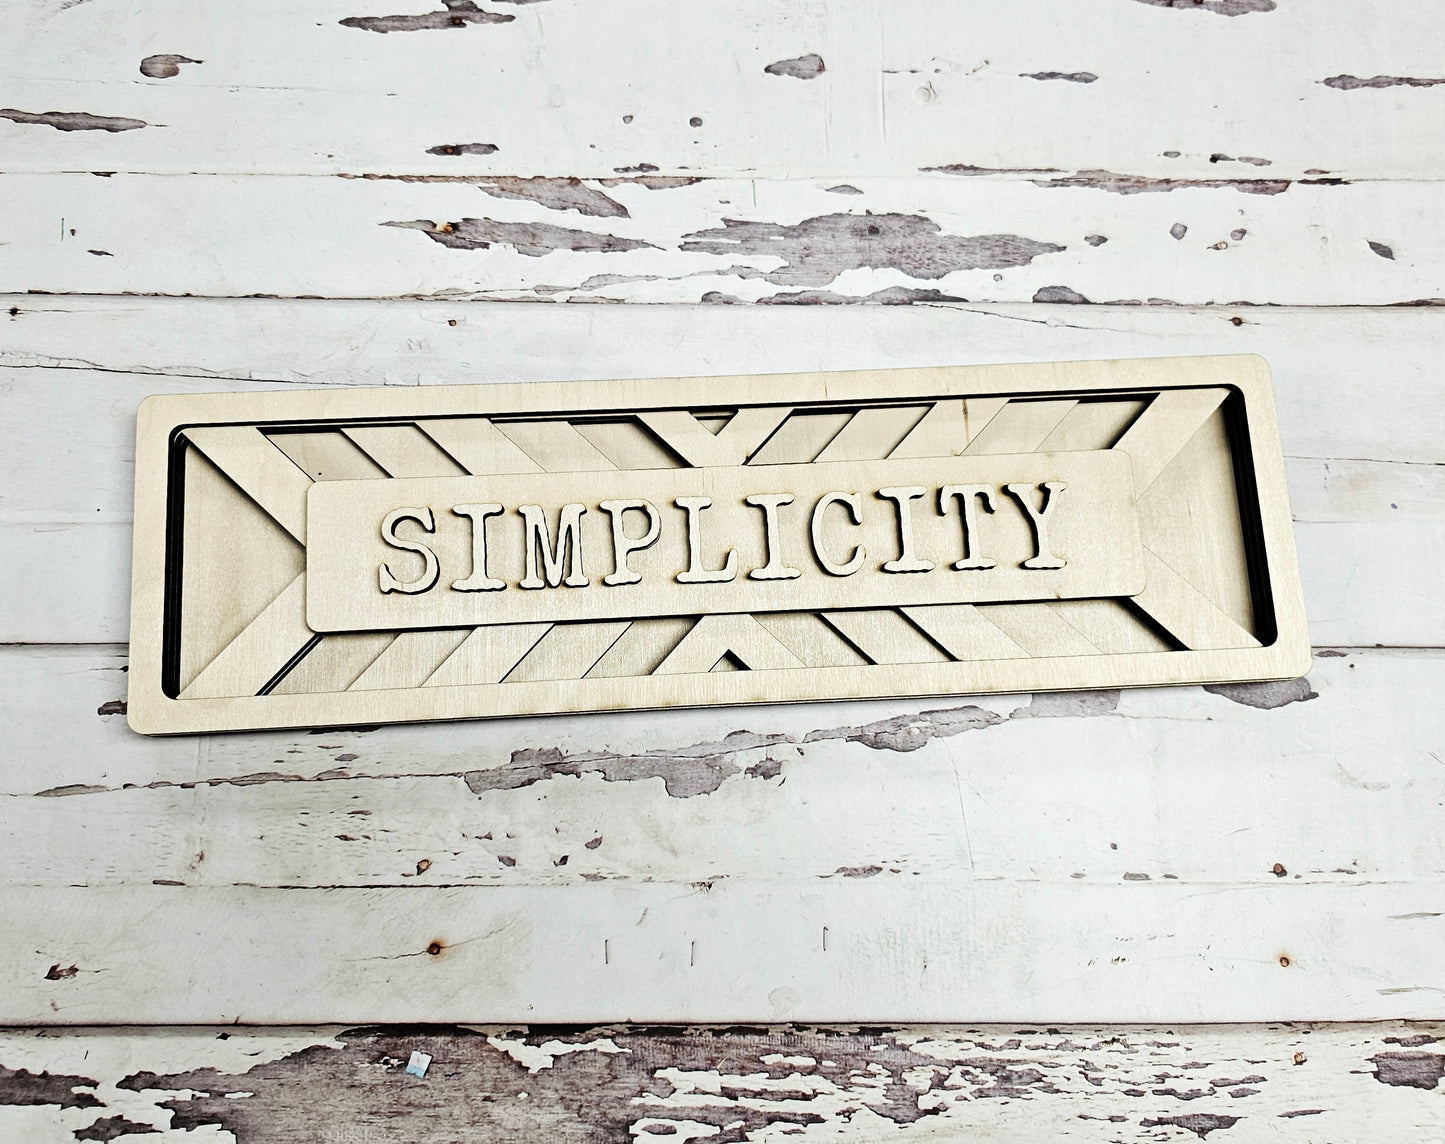 Simplicity tabletop sign